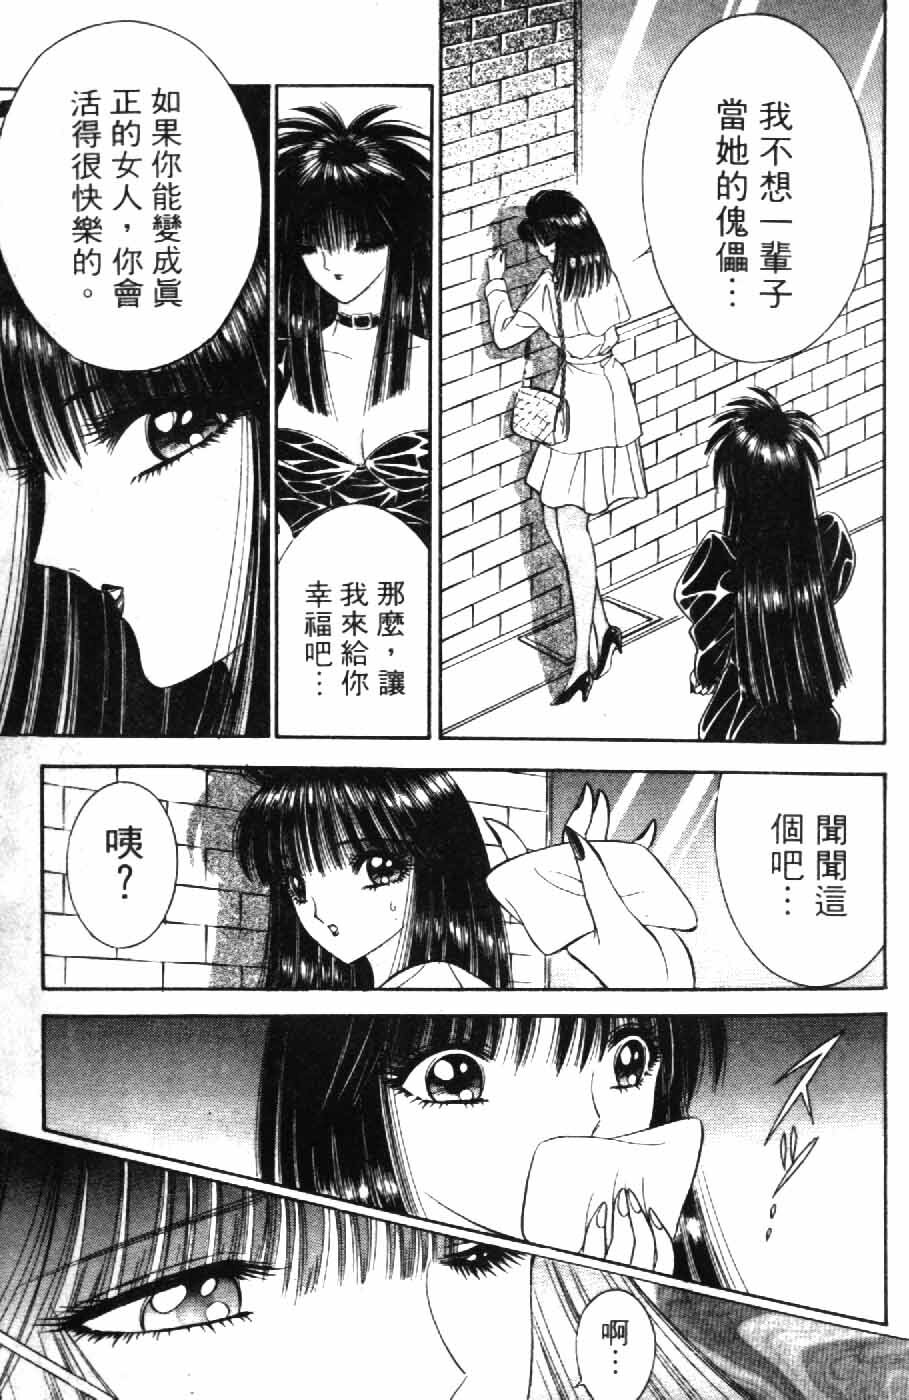 [Senno Knife] Ouma ga Horror Show 2 - Trans Sexual Special Show 2 | 顫慄博覽會 2 [Chinese] page 15 full